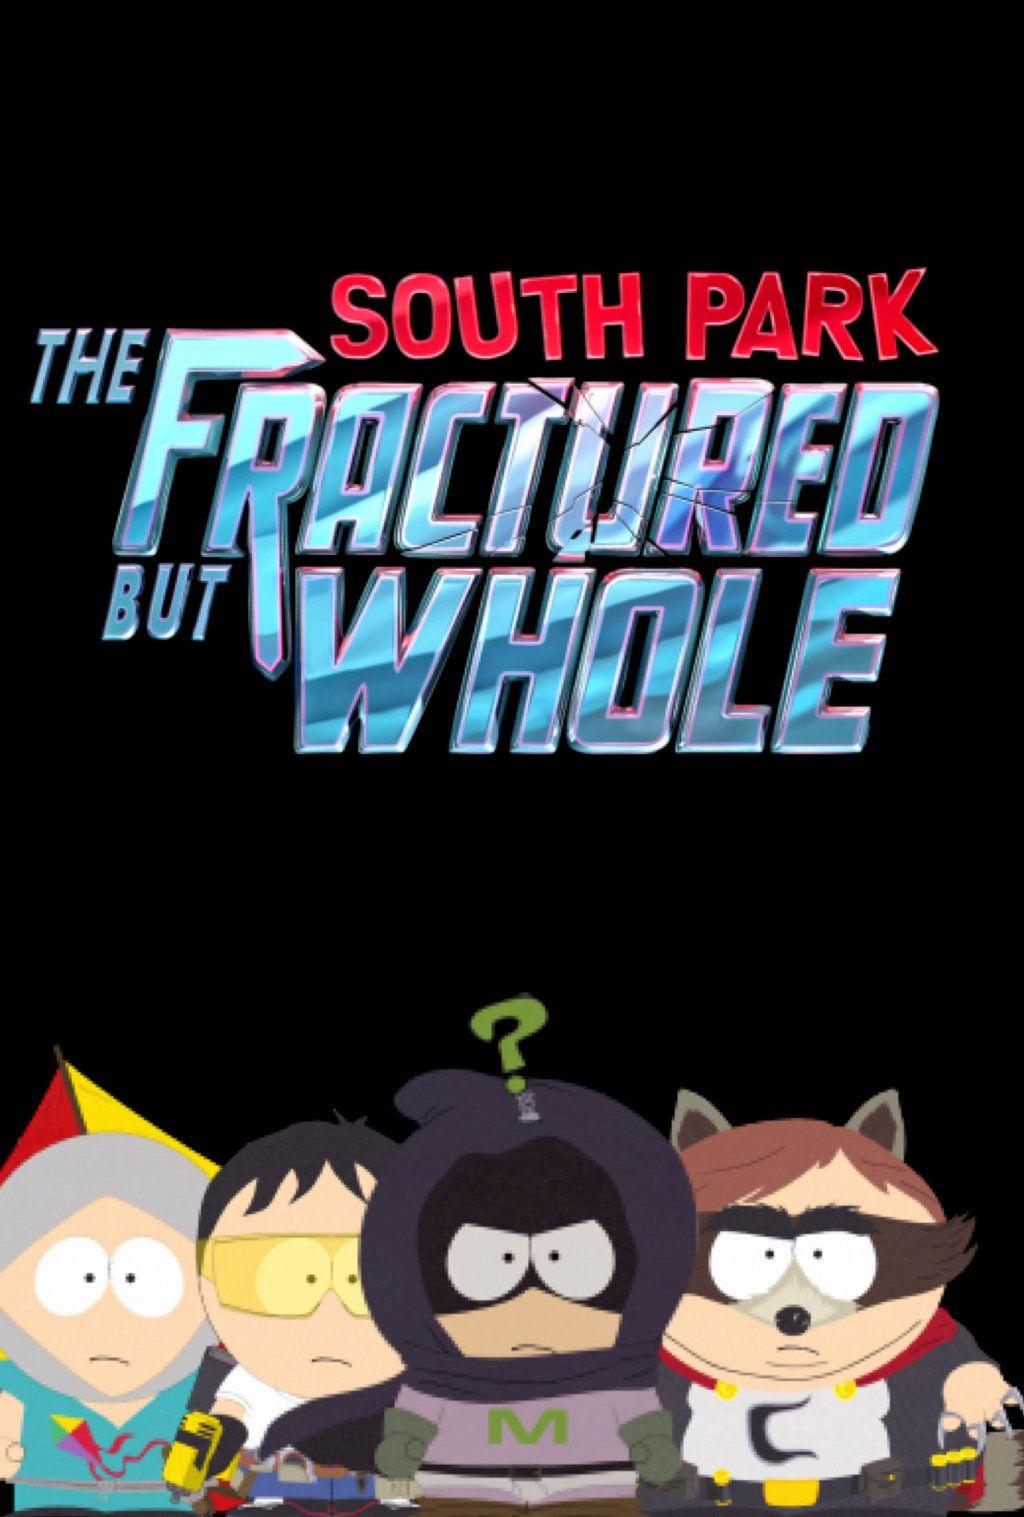 South Park The Fractured But Whole Poster By SP Goji Fan